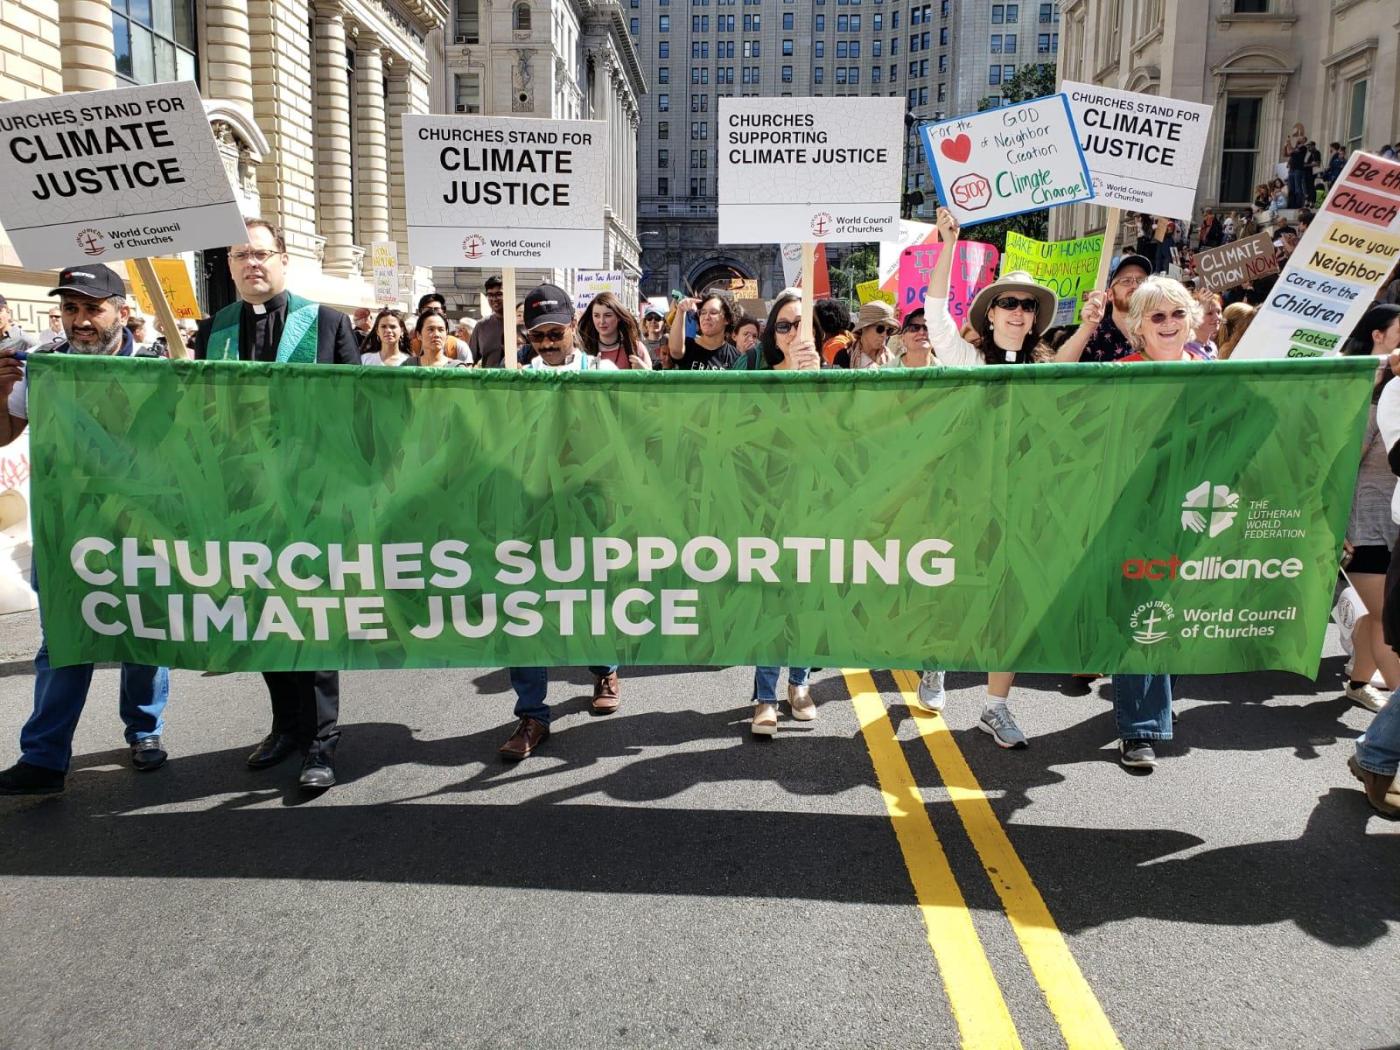 Churches are calling for immediate action on the climate justice on the eve of the UN Climate Action Summit in New York. Photo: Joanna Patouris/ACT